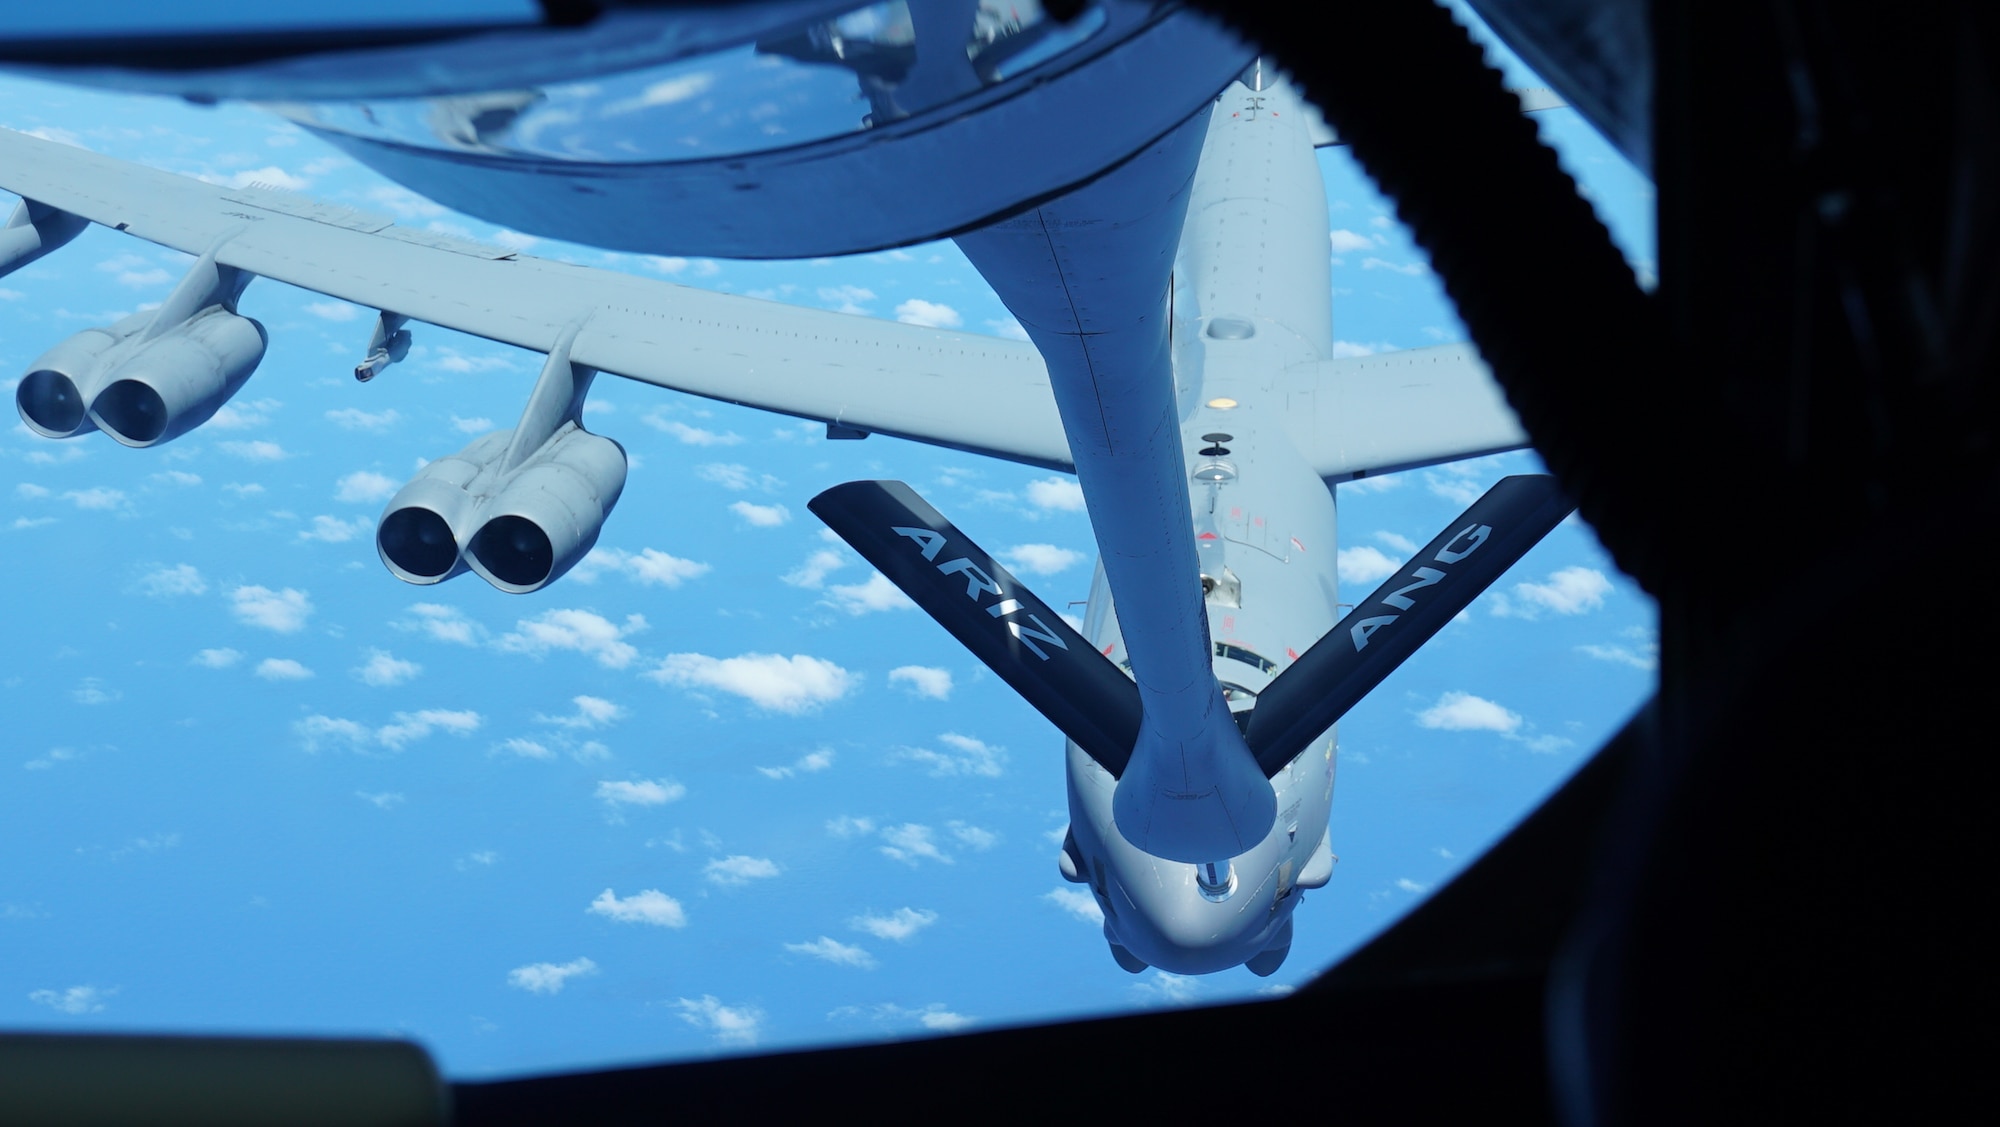 A U.S. Air Force B-52 Stratofortress assigned to the 2nd Bomb Wing, Barksdale Air Force Base, Louisiana, receives fuel from a U.S. Air Force KC-135 Stratotanker assigned to the 506th Expeditionary Air Refueling Squadron during a Bomber Task Force mission over the Philippine Sea, April 26, 2023. Air-to-air refueling capabilities are a key logistical enabler of U.S., allied, and partner nations’ aircraft, protecting prosperity, peace, and stability across the Pacific. (U.S. Air Force Photo by Capt. Katie Mueller)